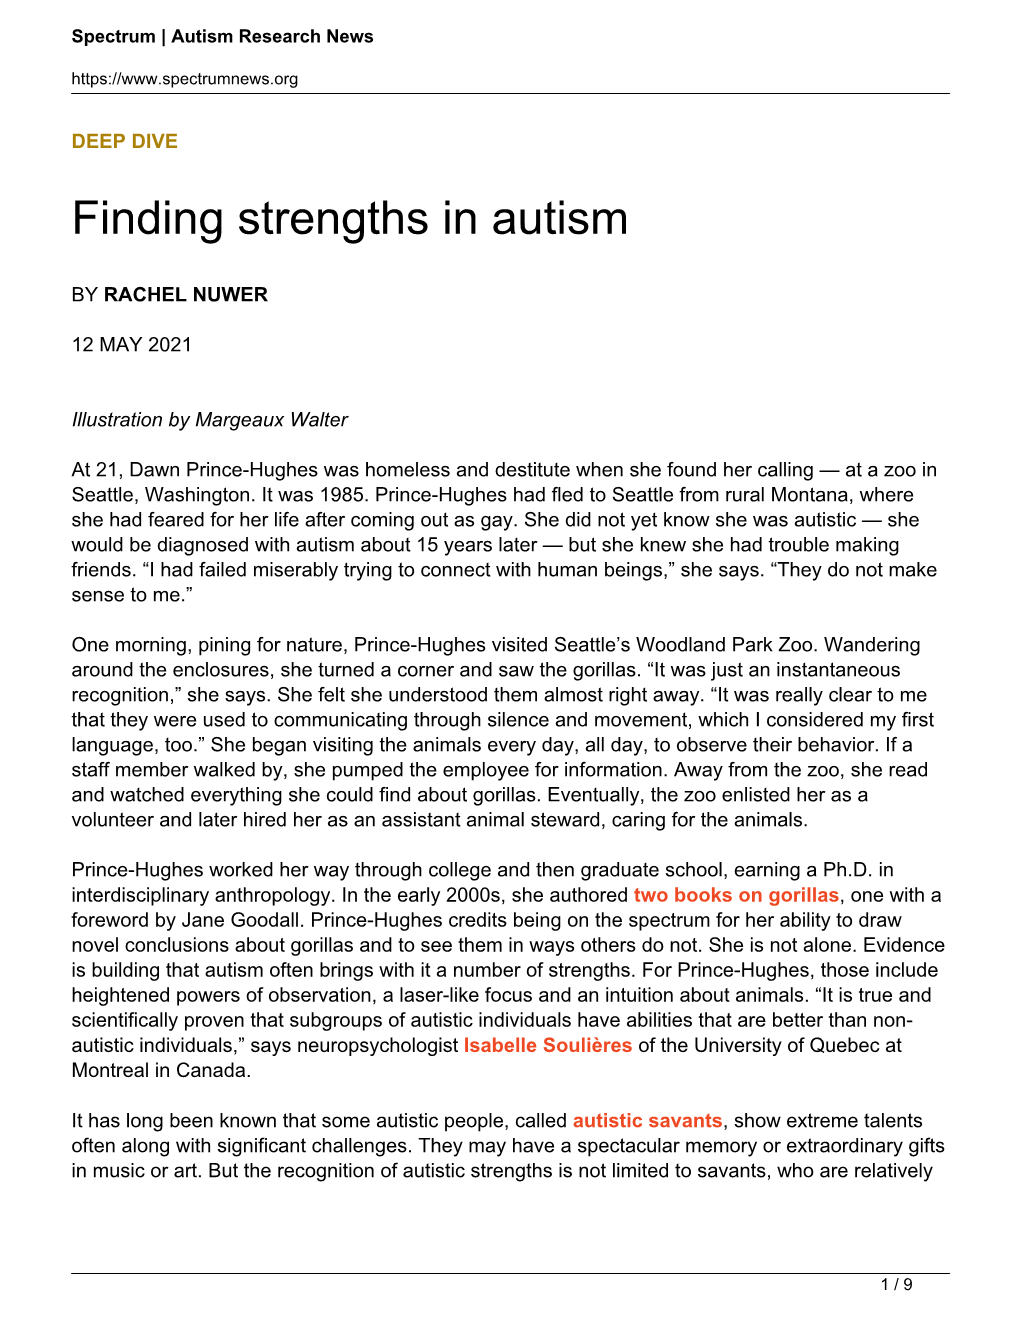 Finding Strengths in Autism